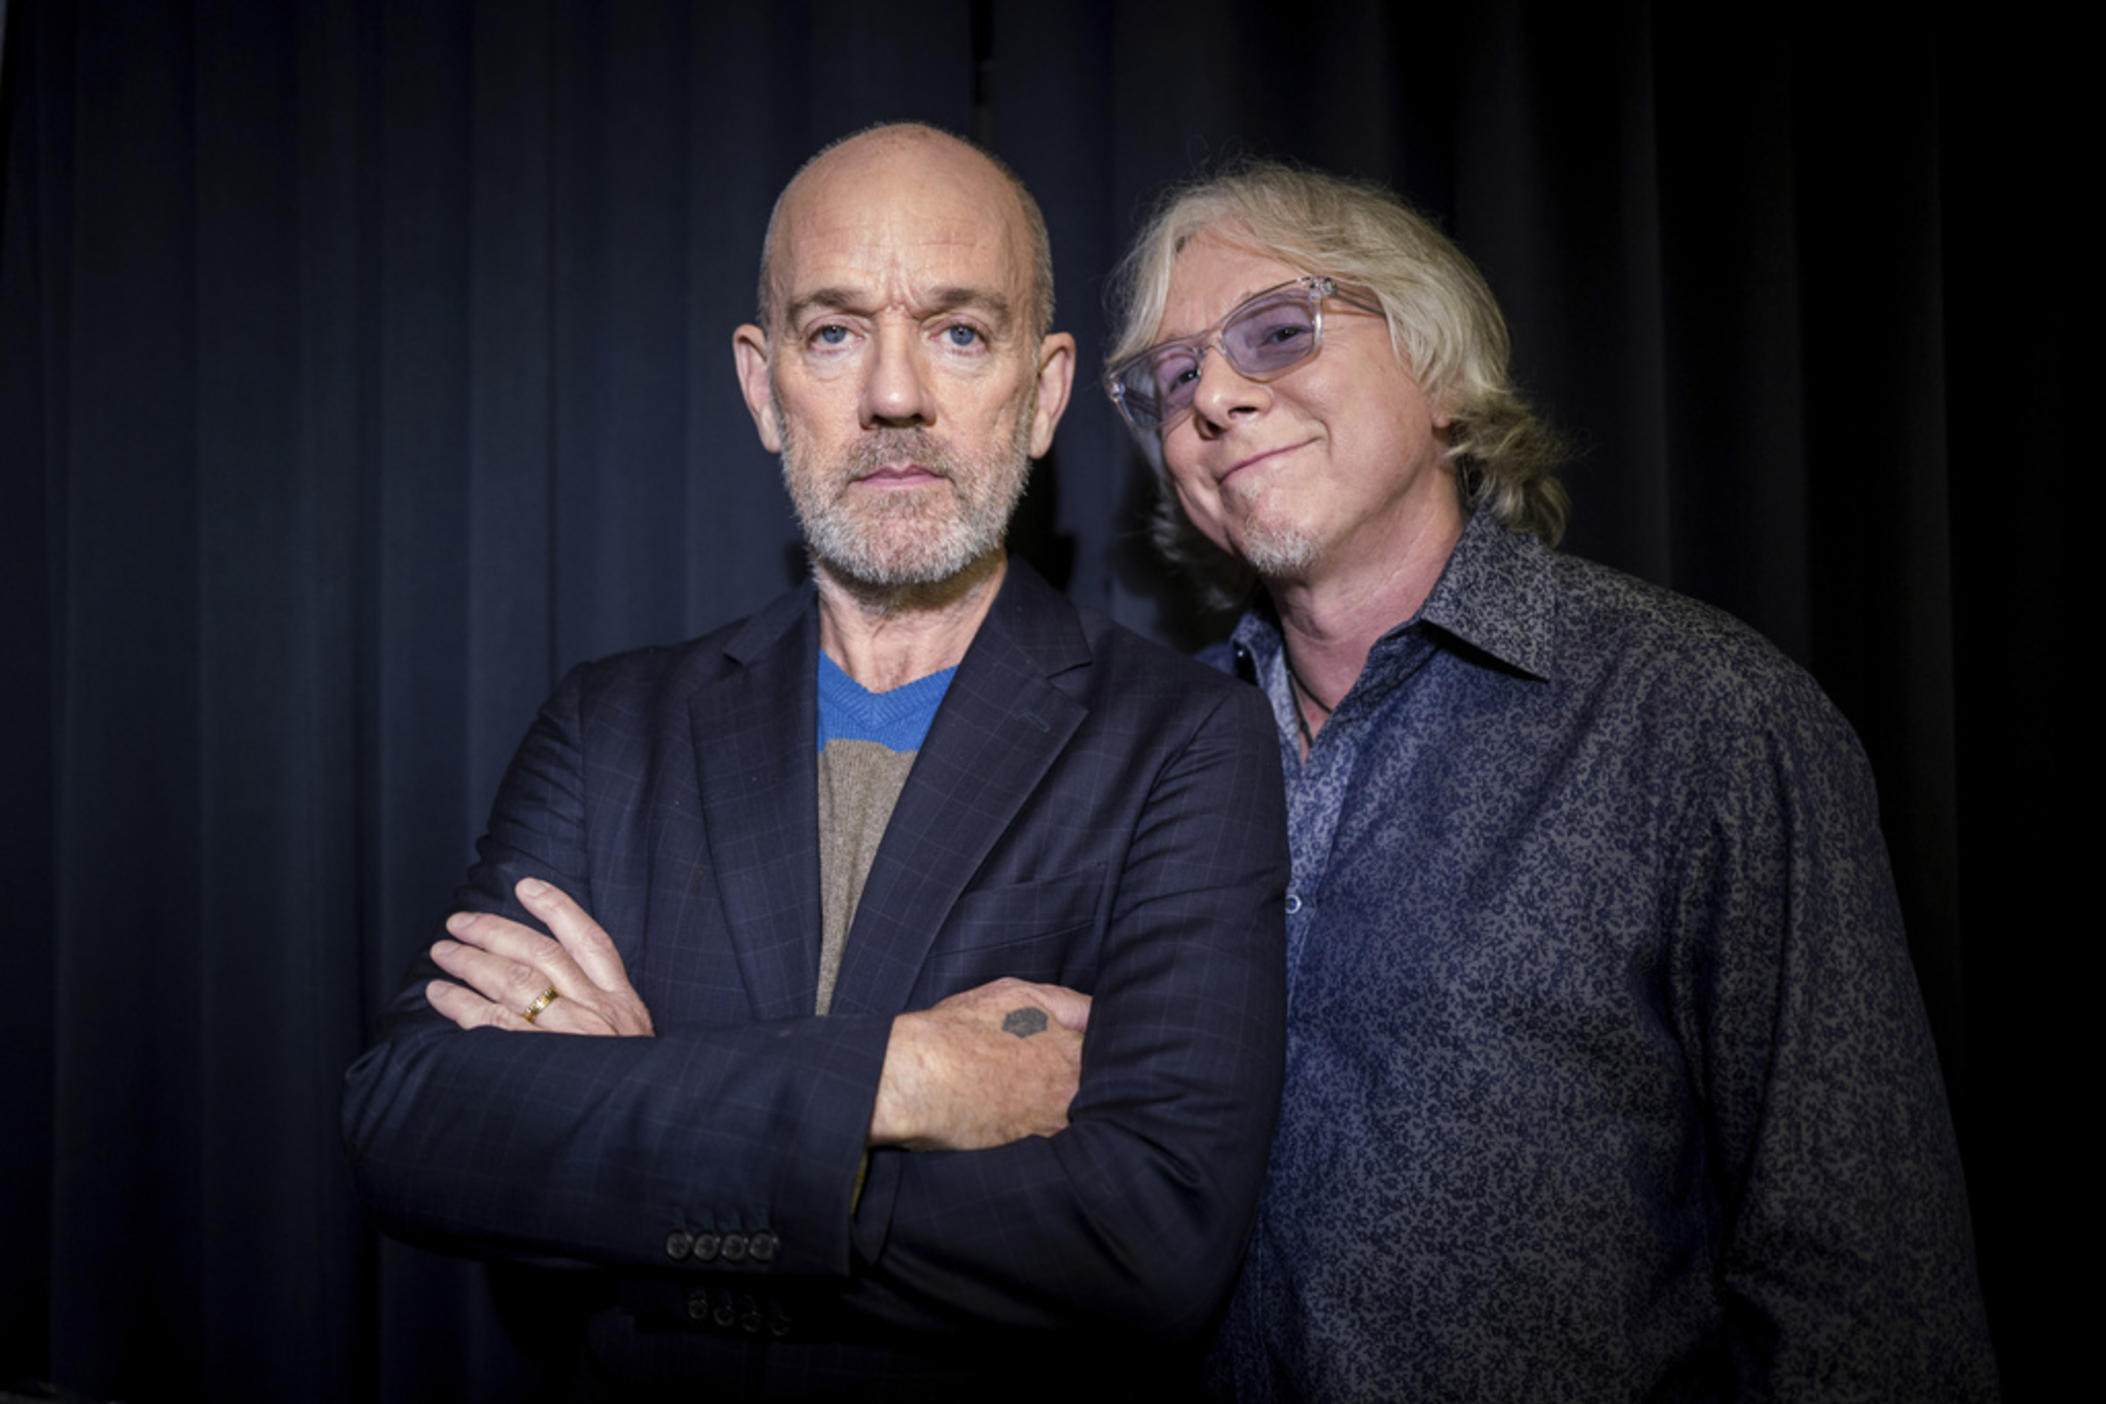 This Oct. 28, 2019 photo shows Michael Stipe and Mike Mills, from R.E.M. posing for a portrait in New York.